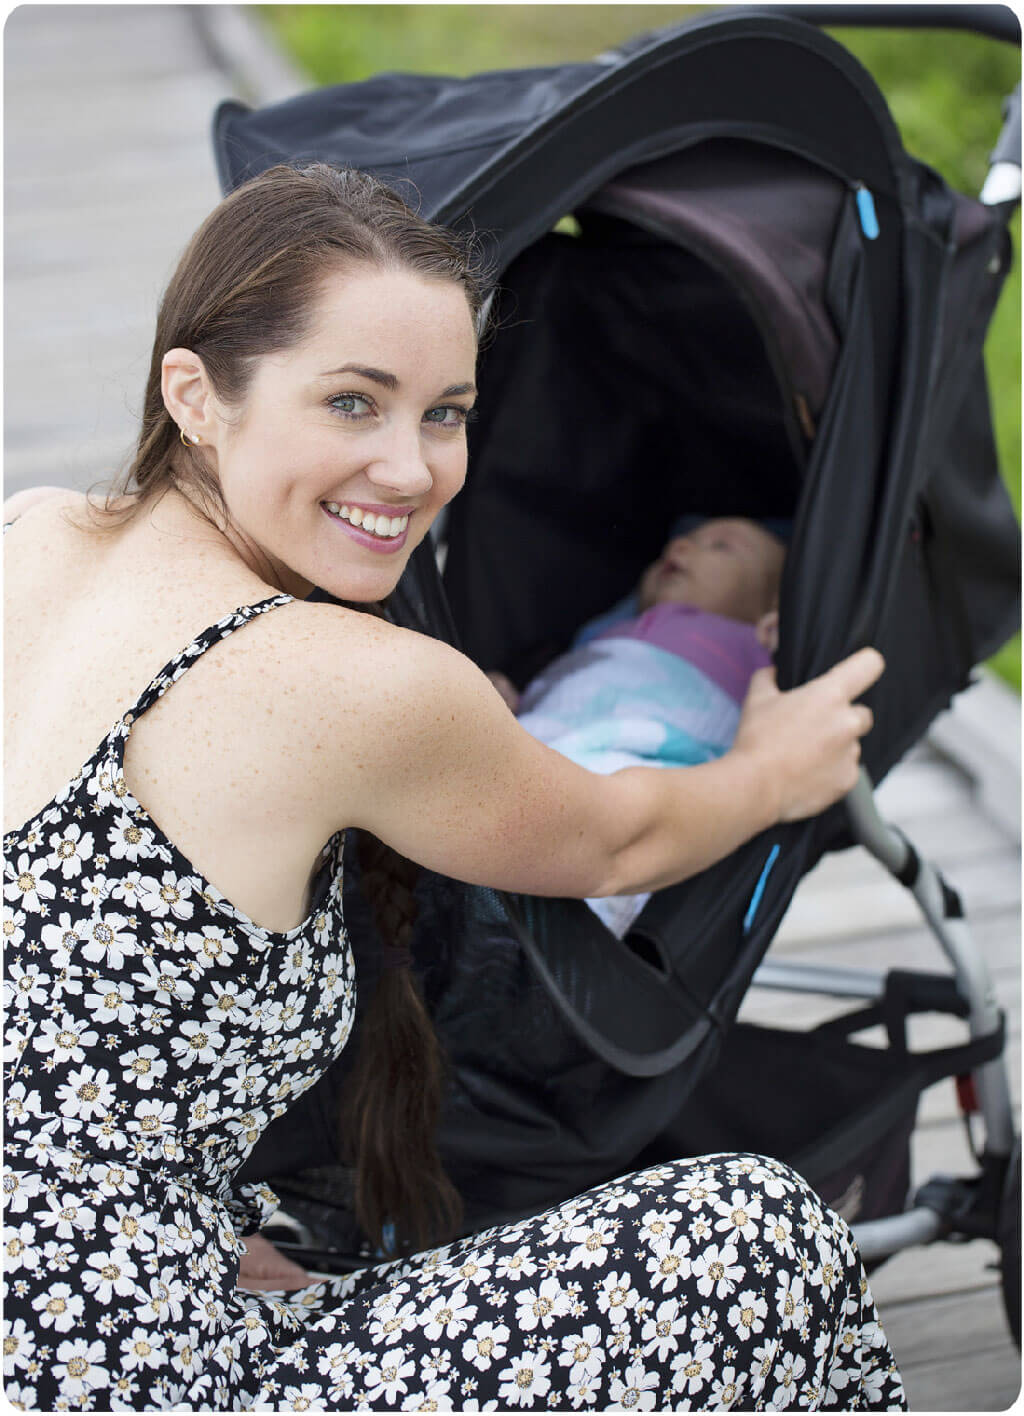 Enjoy getting out and about with your baby